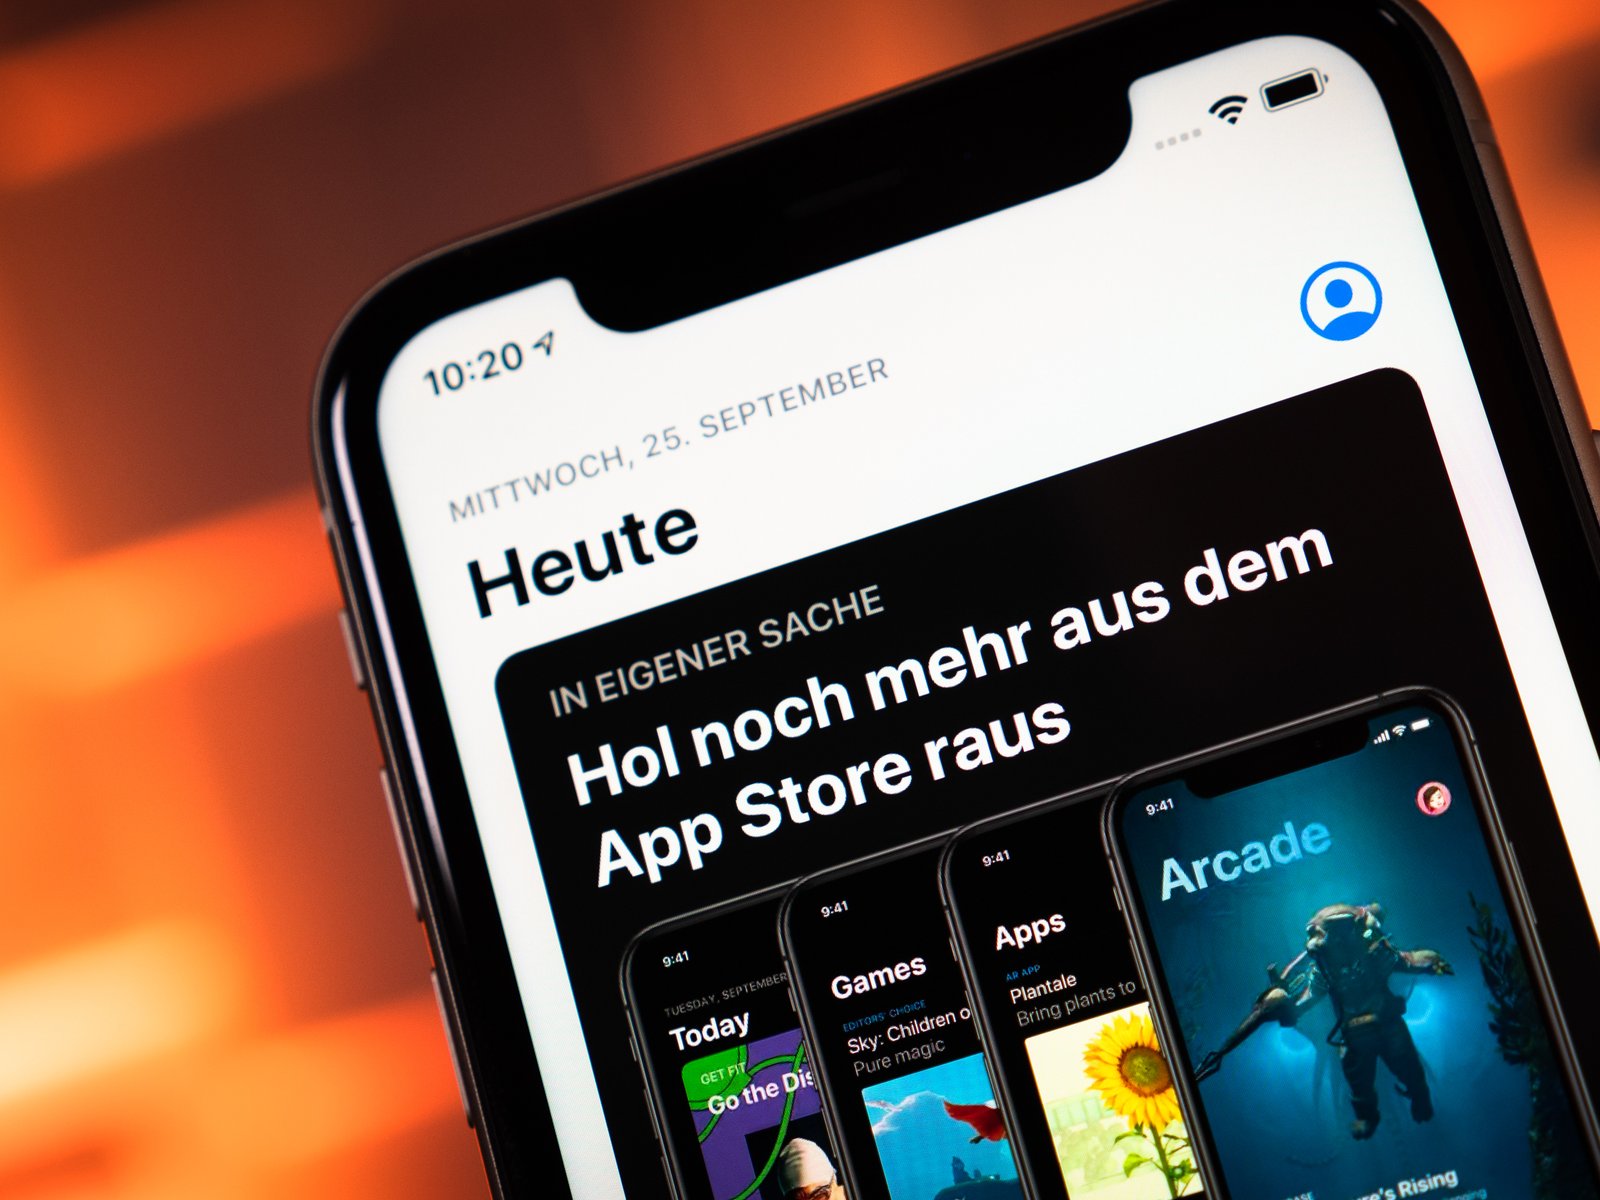 iphone emulator for windows with app store